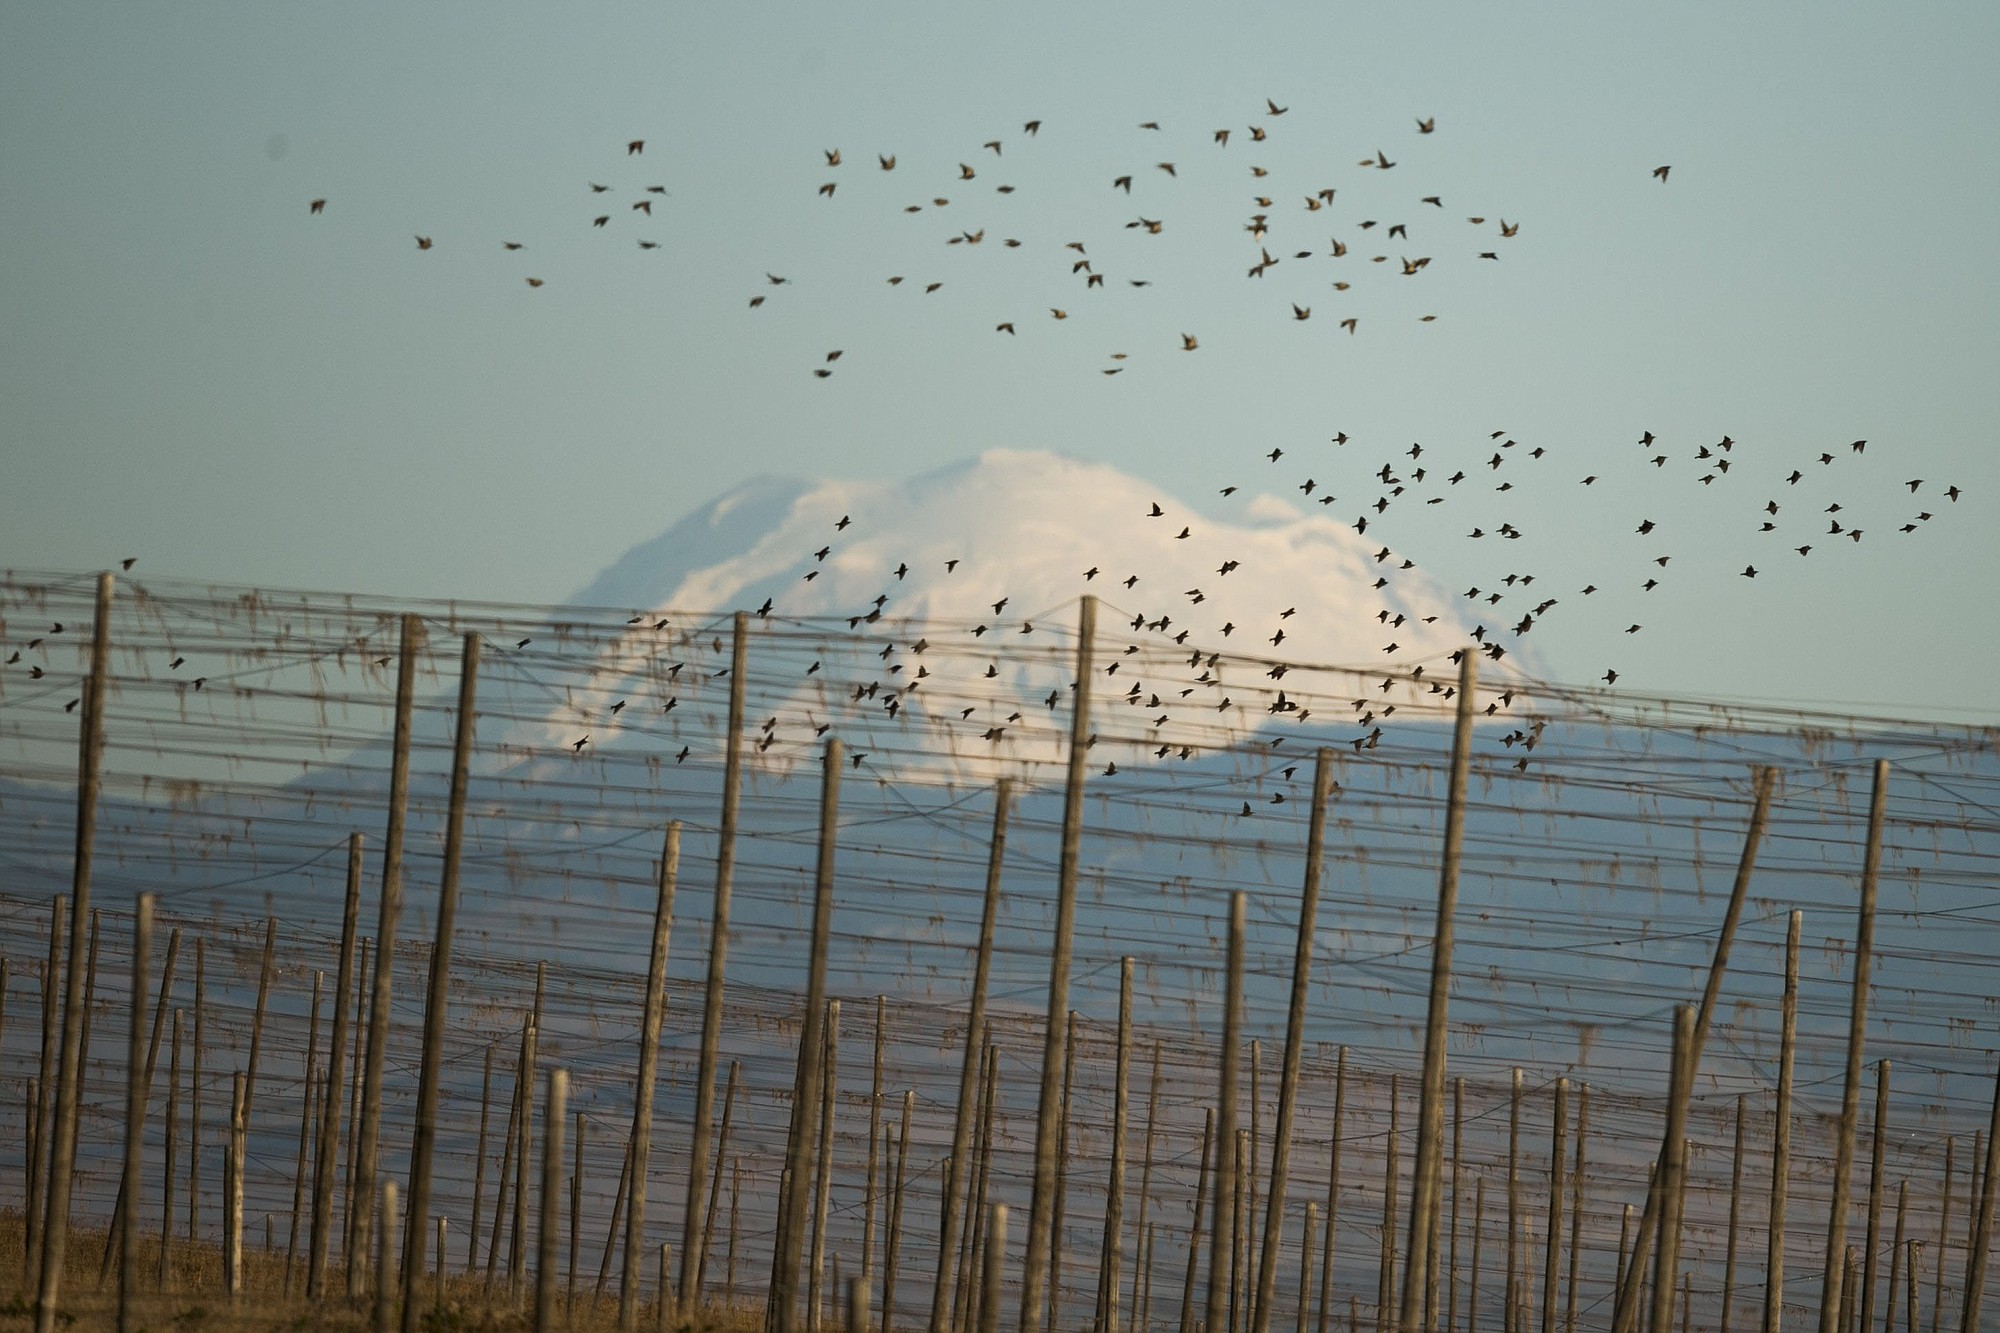 A large flock of starlings takes off over old hop trellises upon seeing one of the falcons.